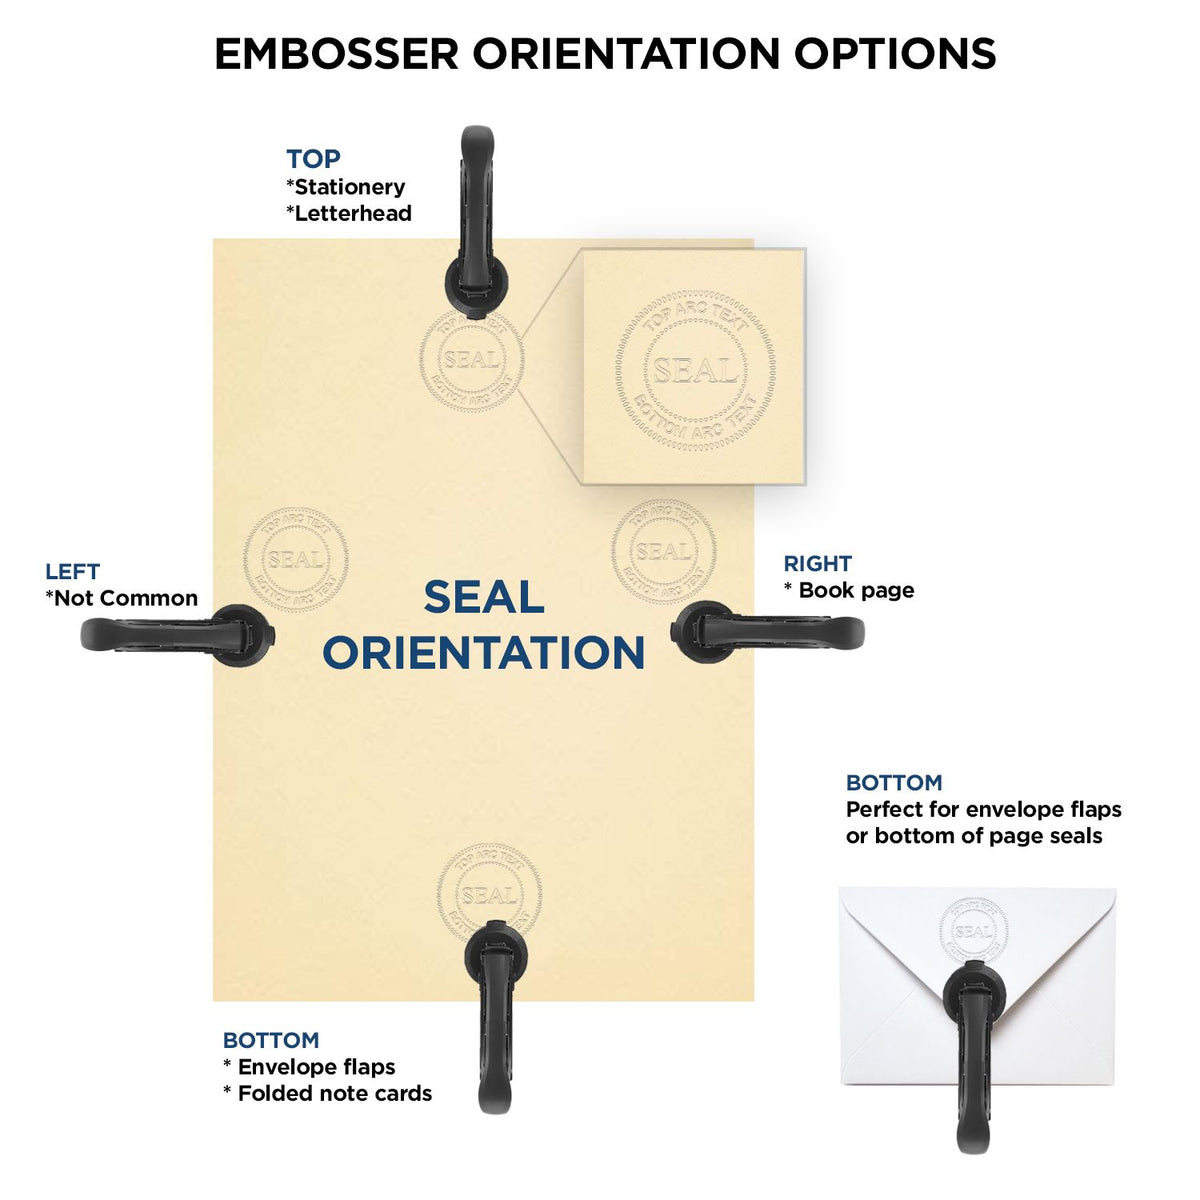 An infographic for the Handheld Maryland Land Surveyor Seal showing embosser orientation, this is showing examples of a top, bottom, right and left insert.